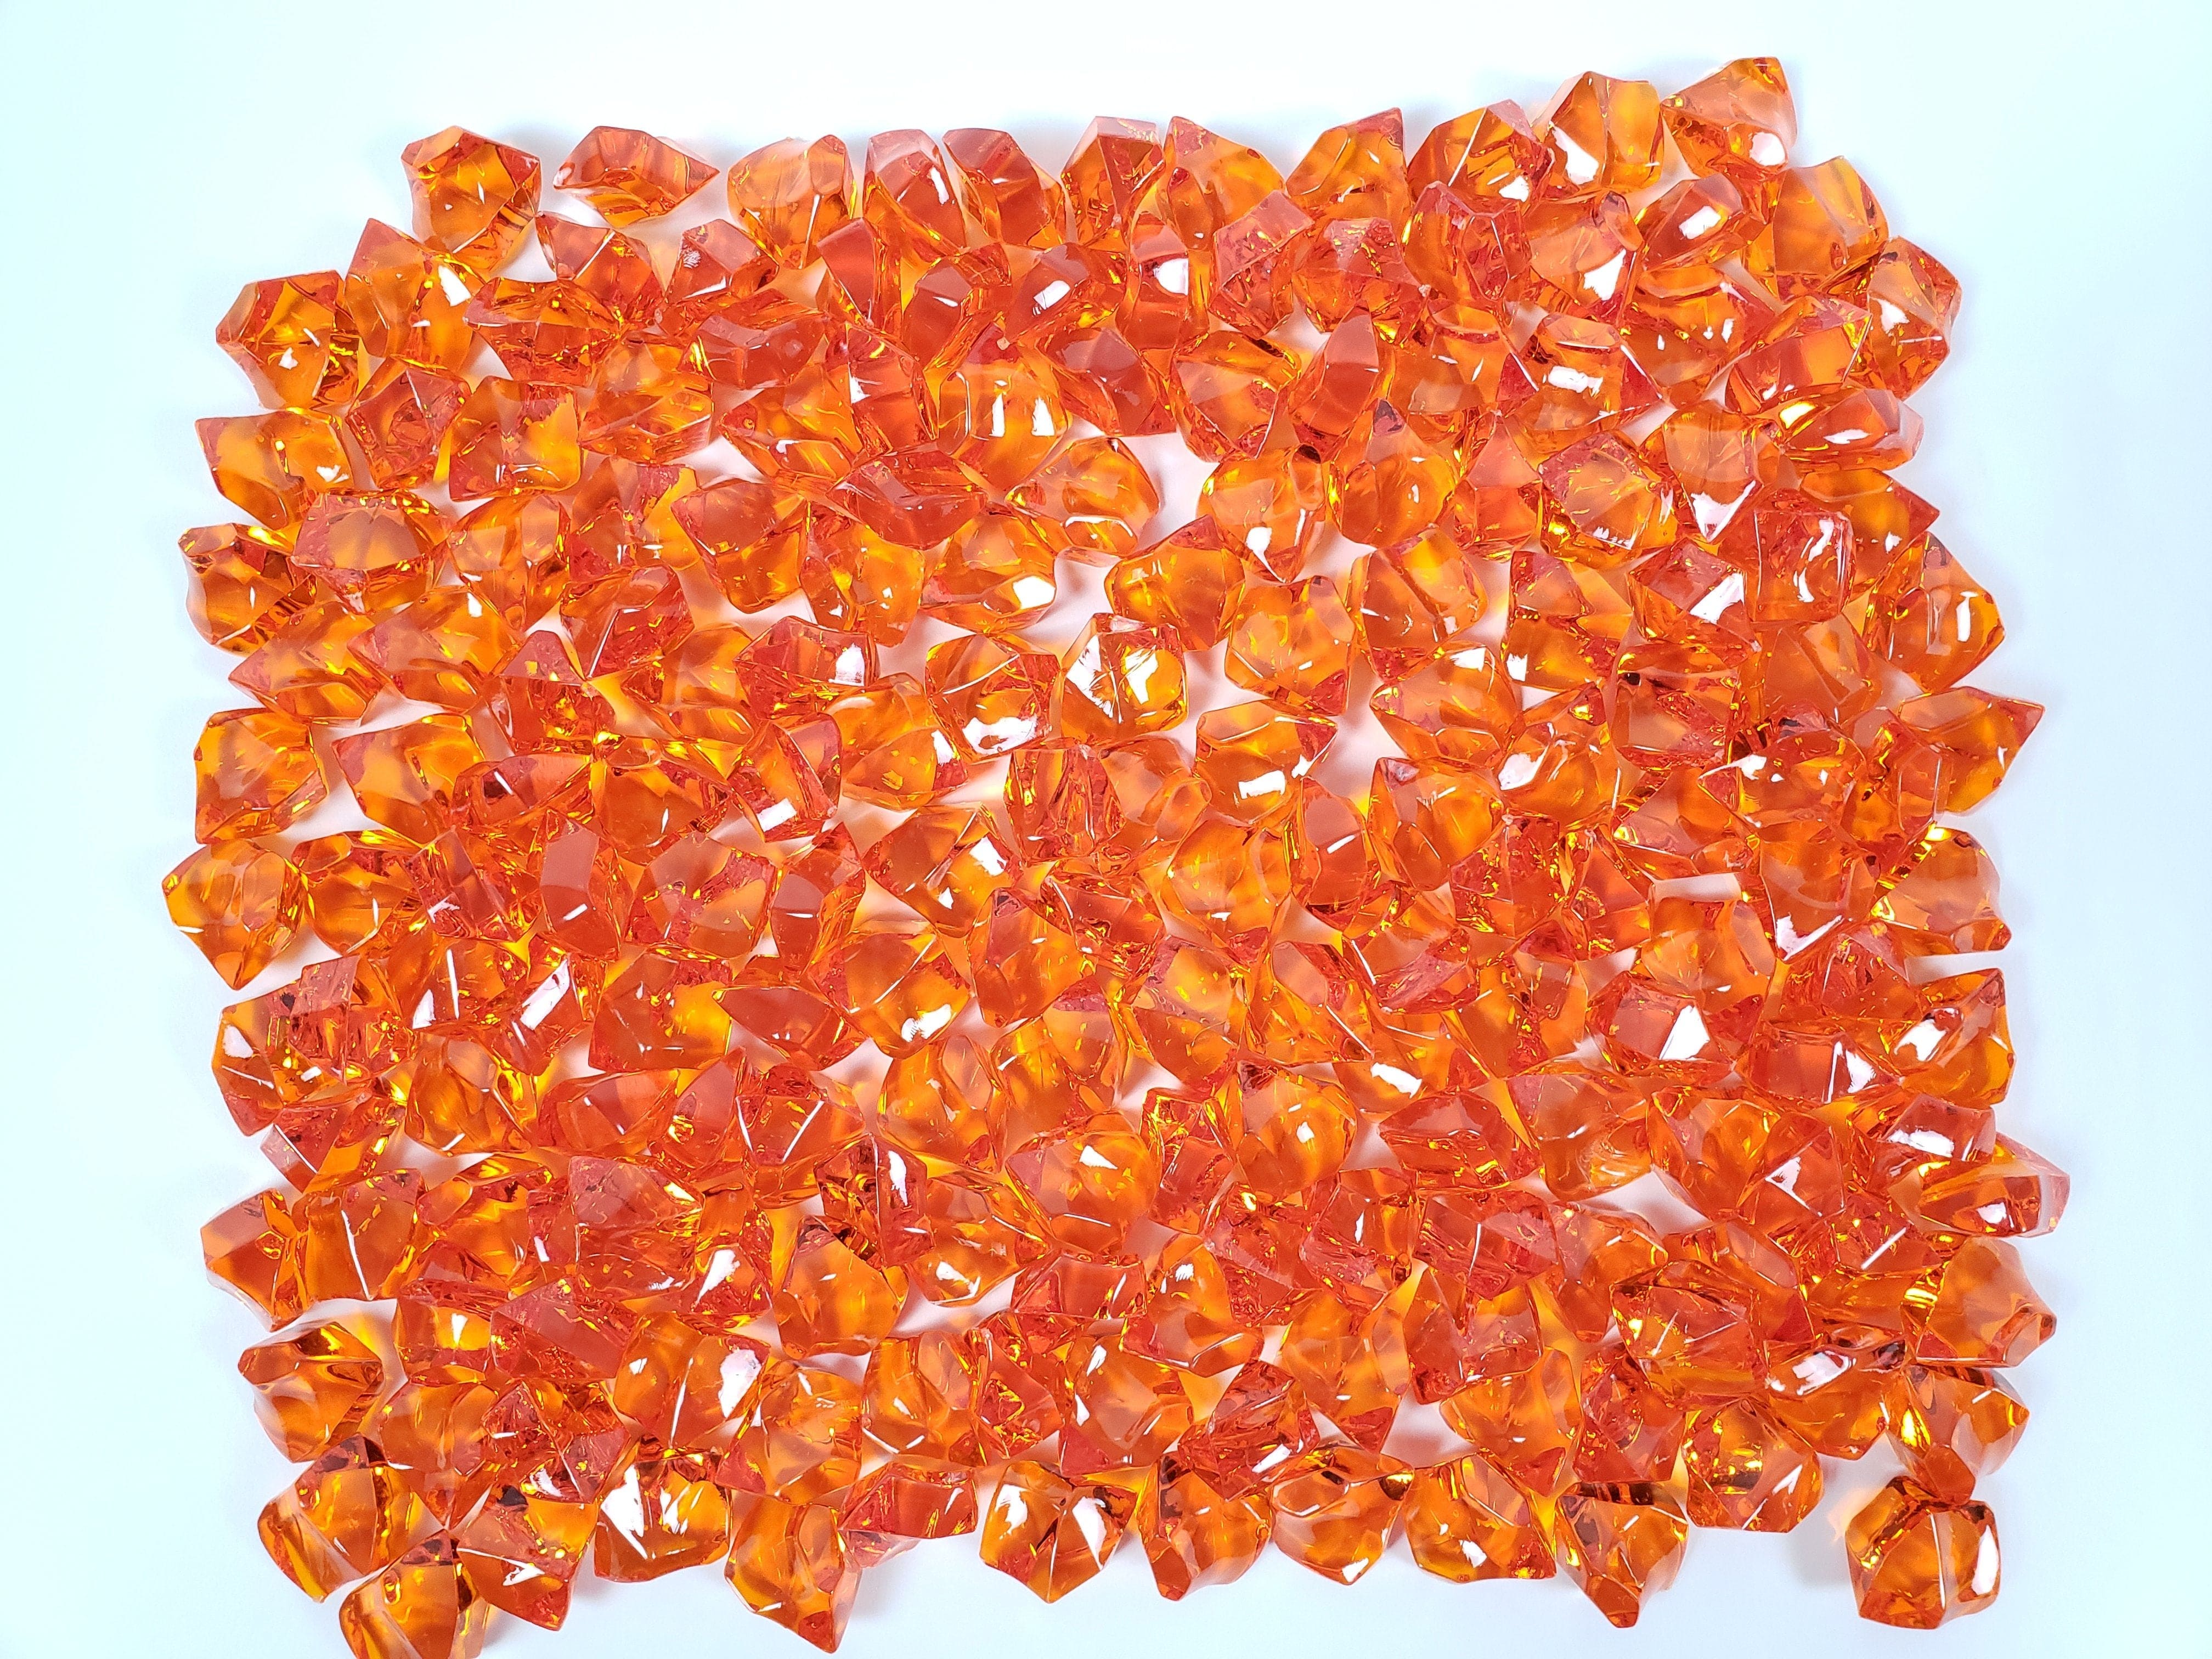 Orange Fireplace Crystals 89004 - Touchstone Home Products, Inc.